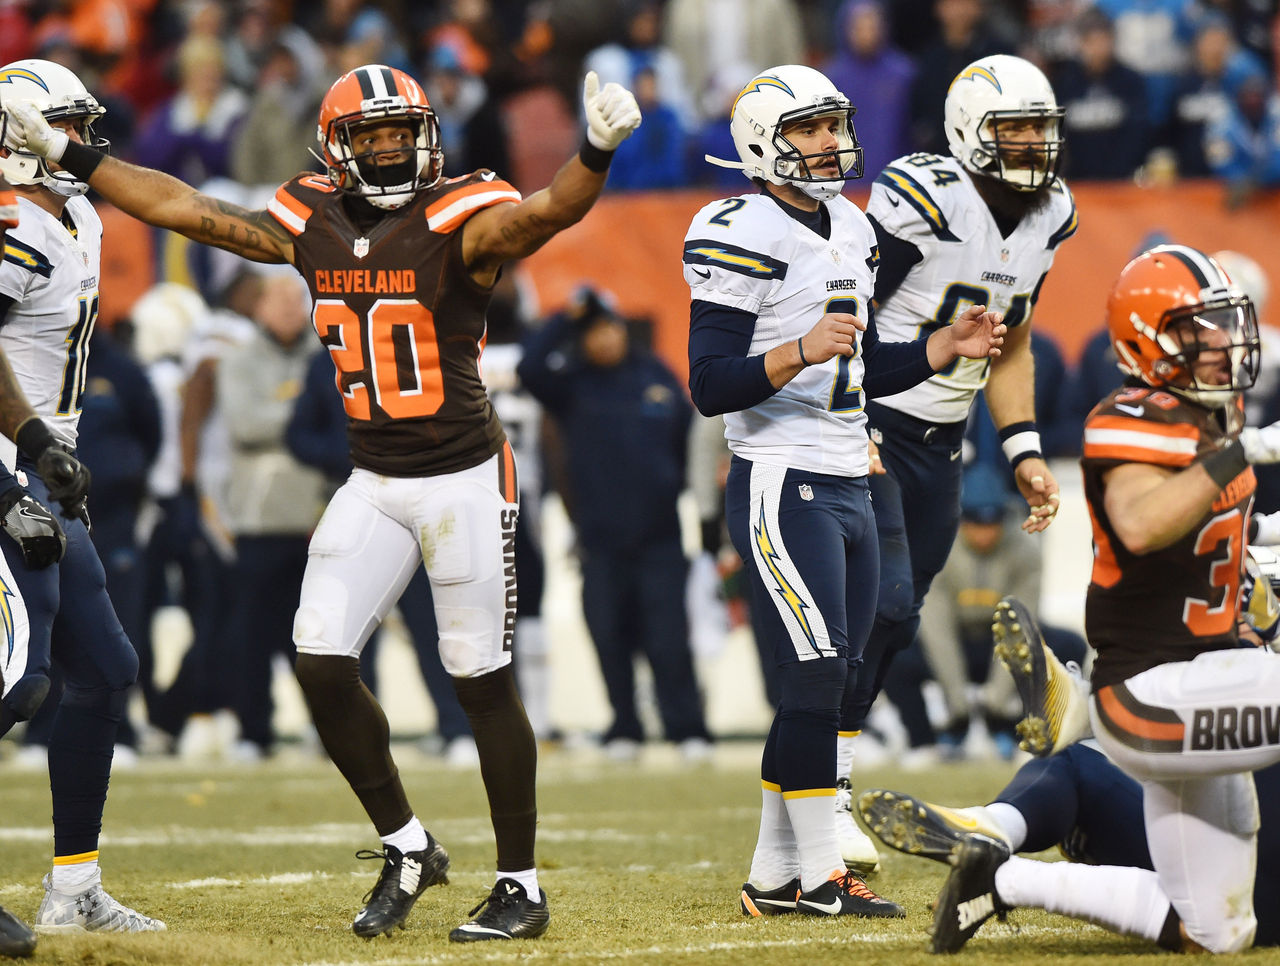 cropped_2016-12-24T213803Z_1920553280_NOCID_RTRMADP_3_NFL-SAN-DIEGO-CHARGERS-AT-CLEVELAND-BROWNS.jpg